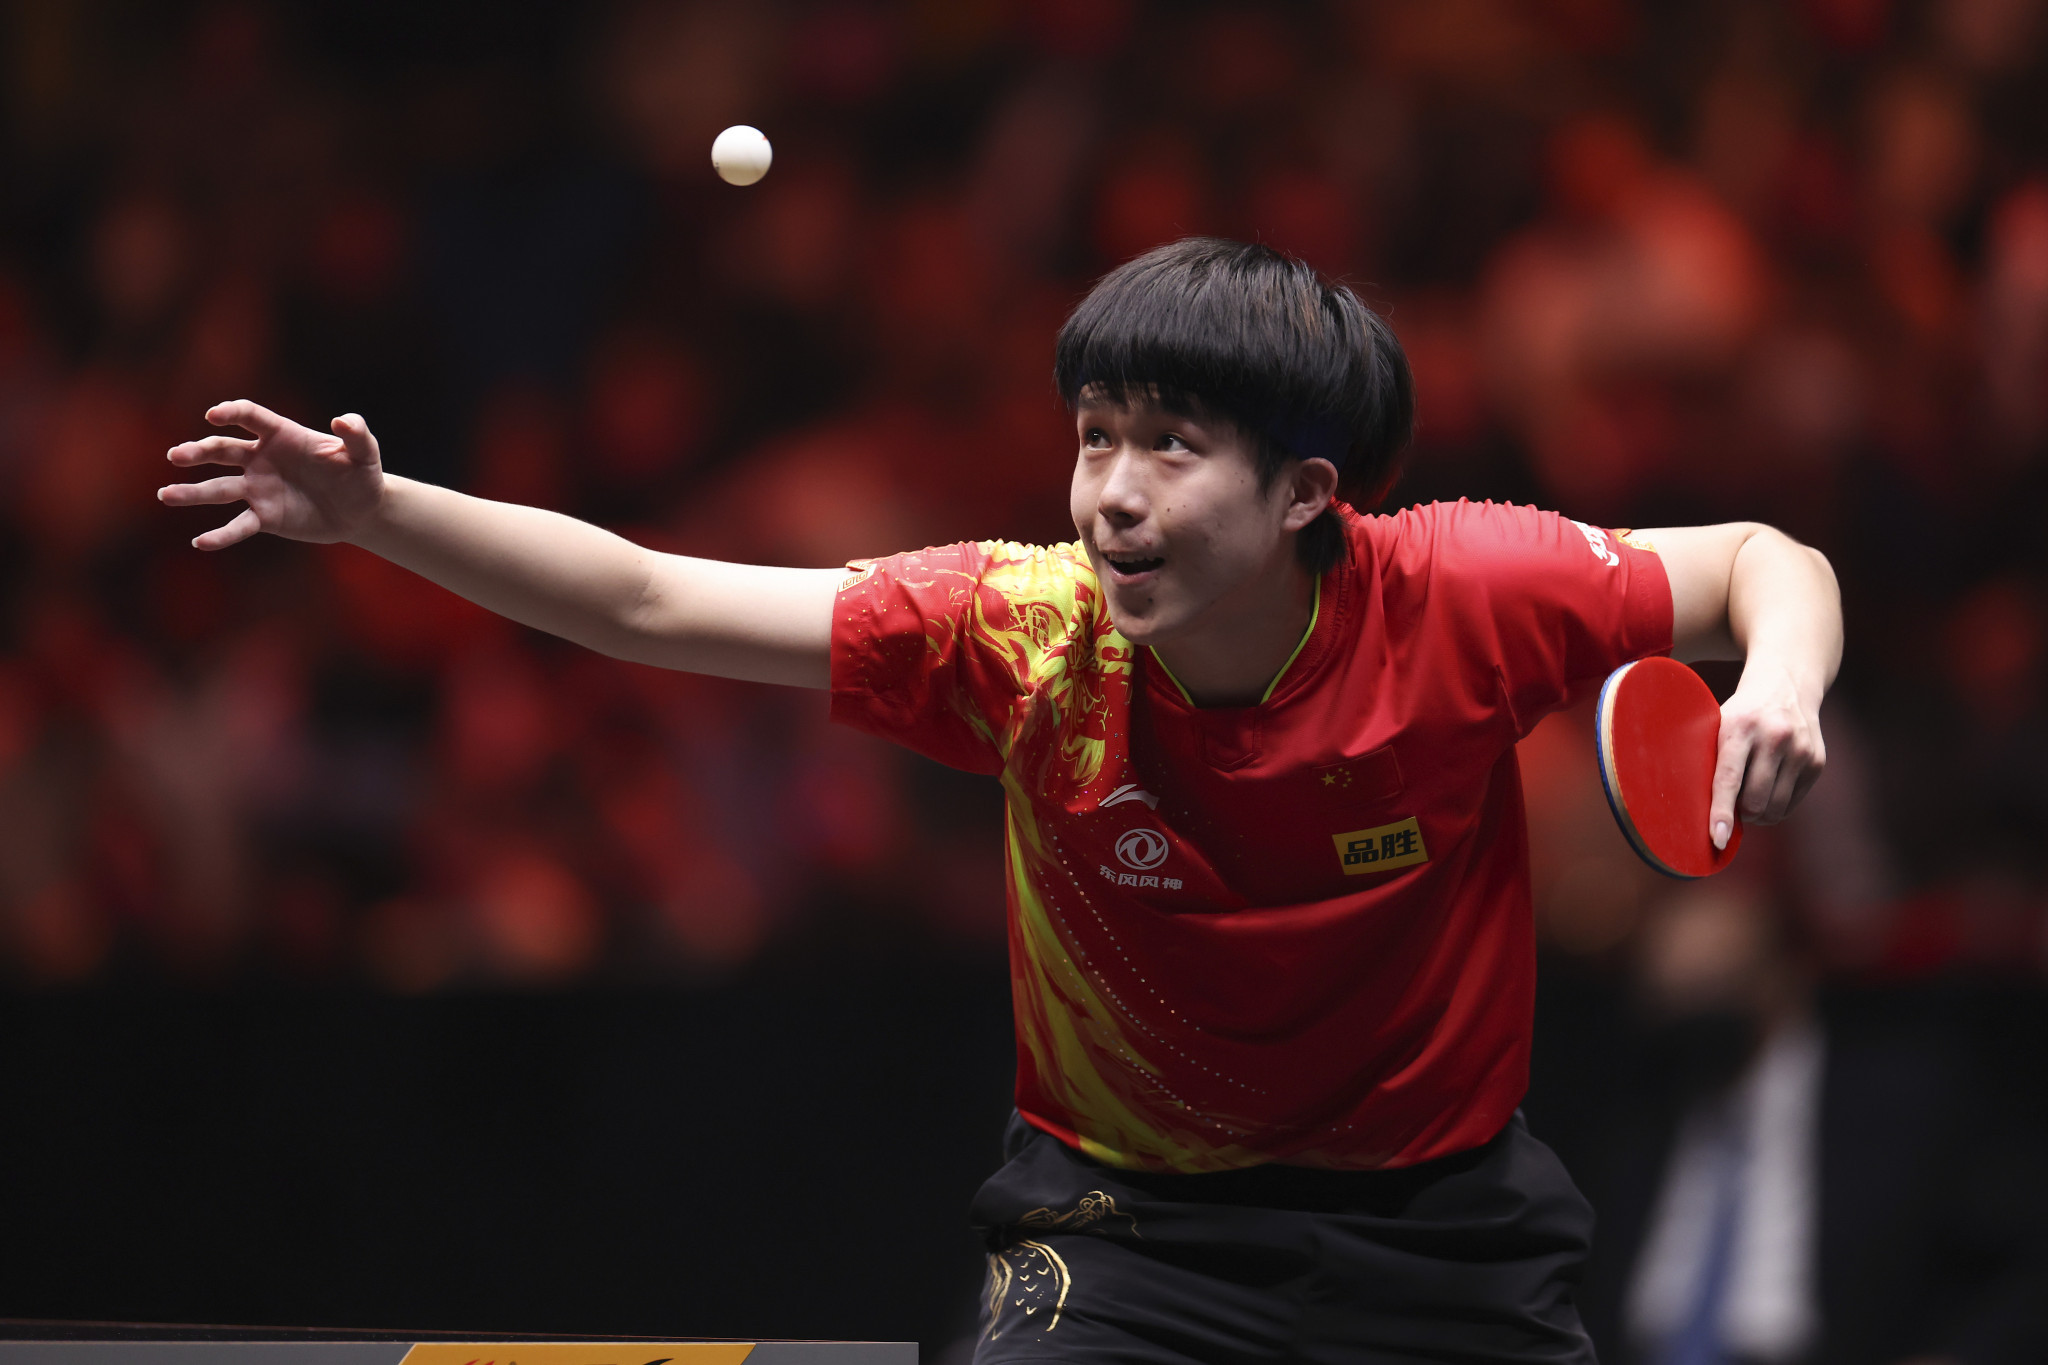 Wang Chuqin, pictured, and Sun Yingsha won gold at the WTT Cup Finals ©Getty Images